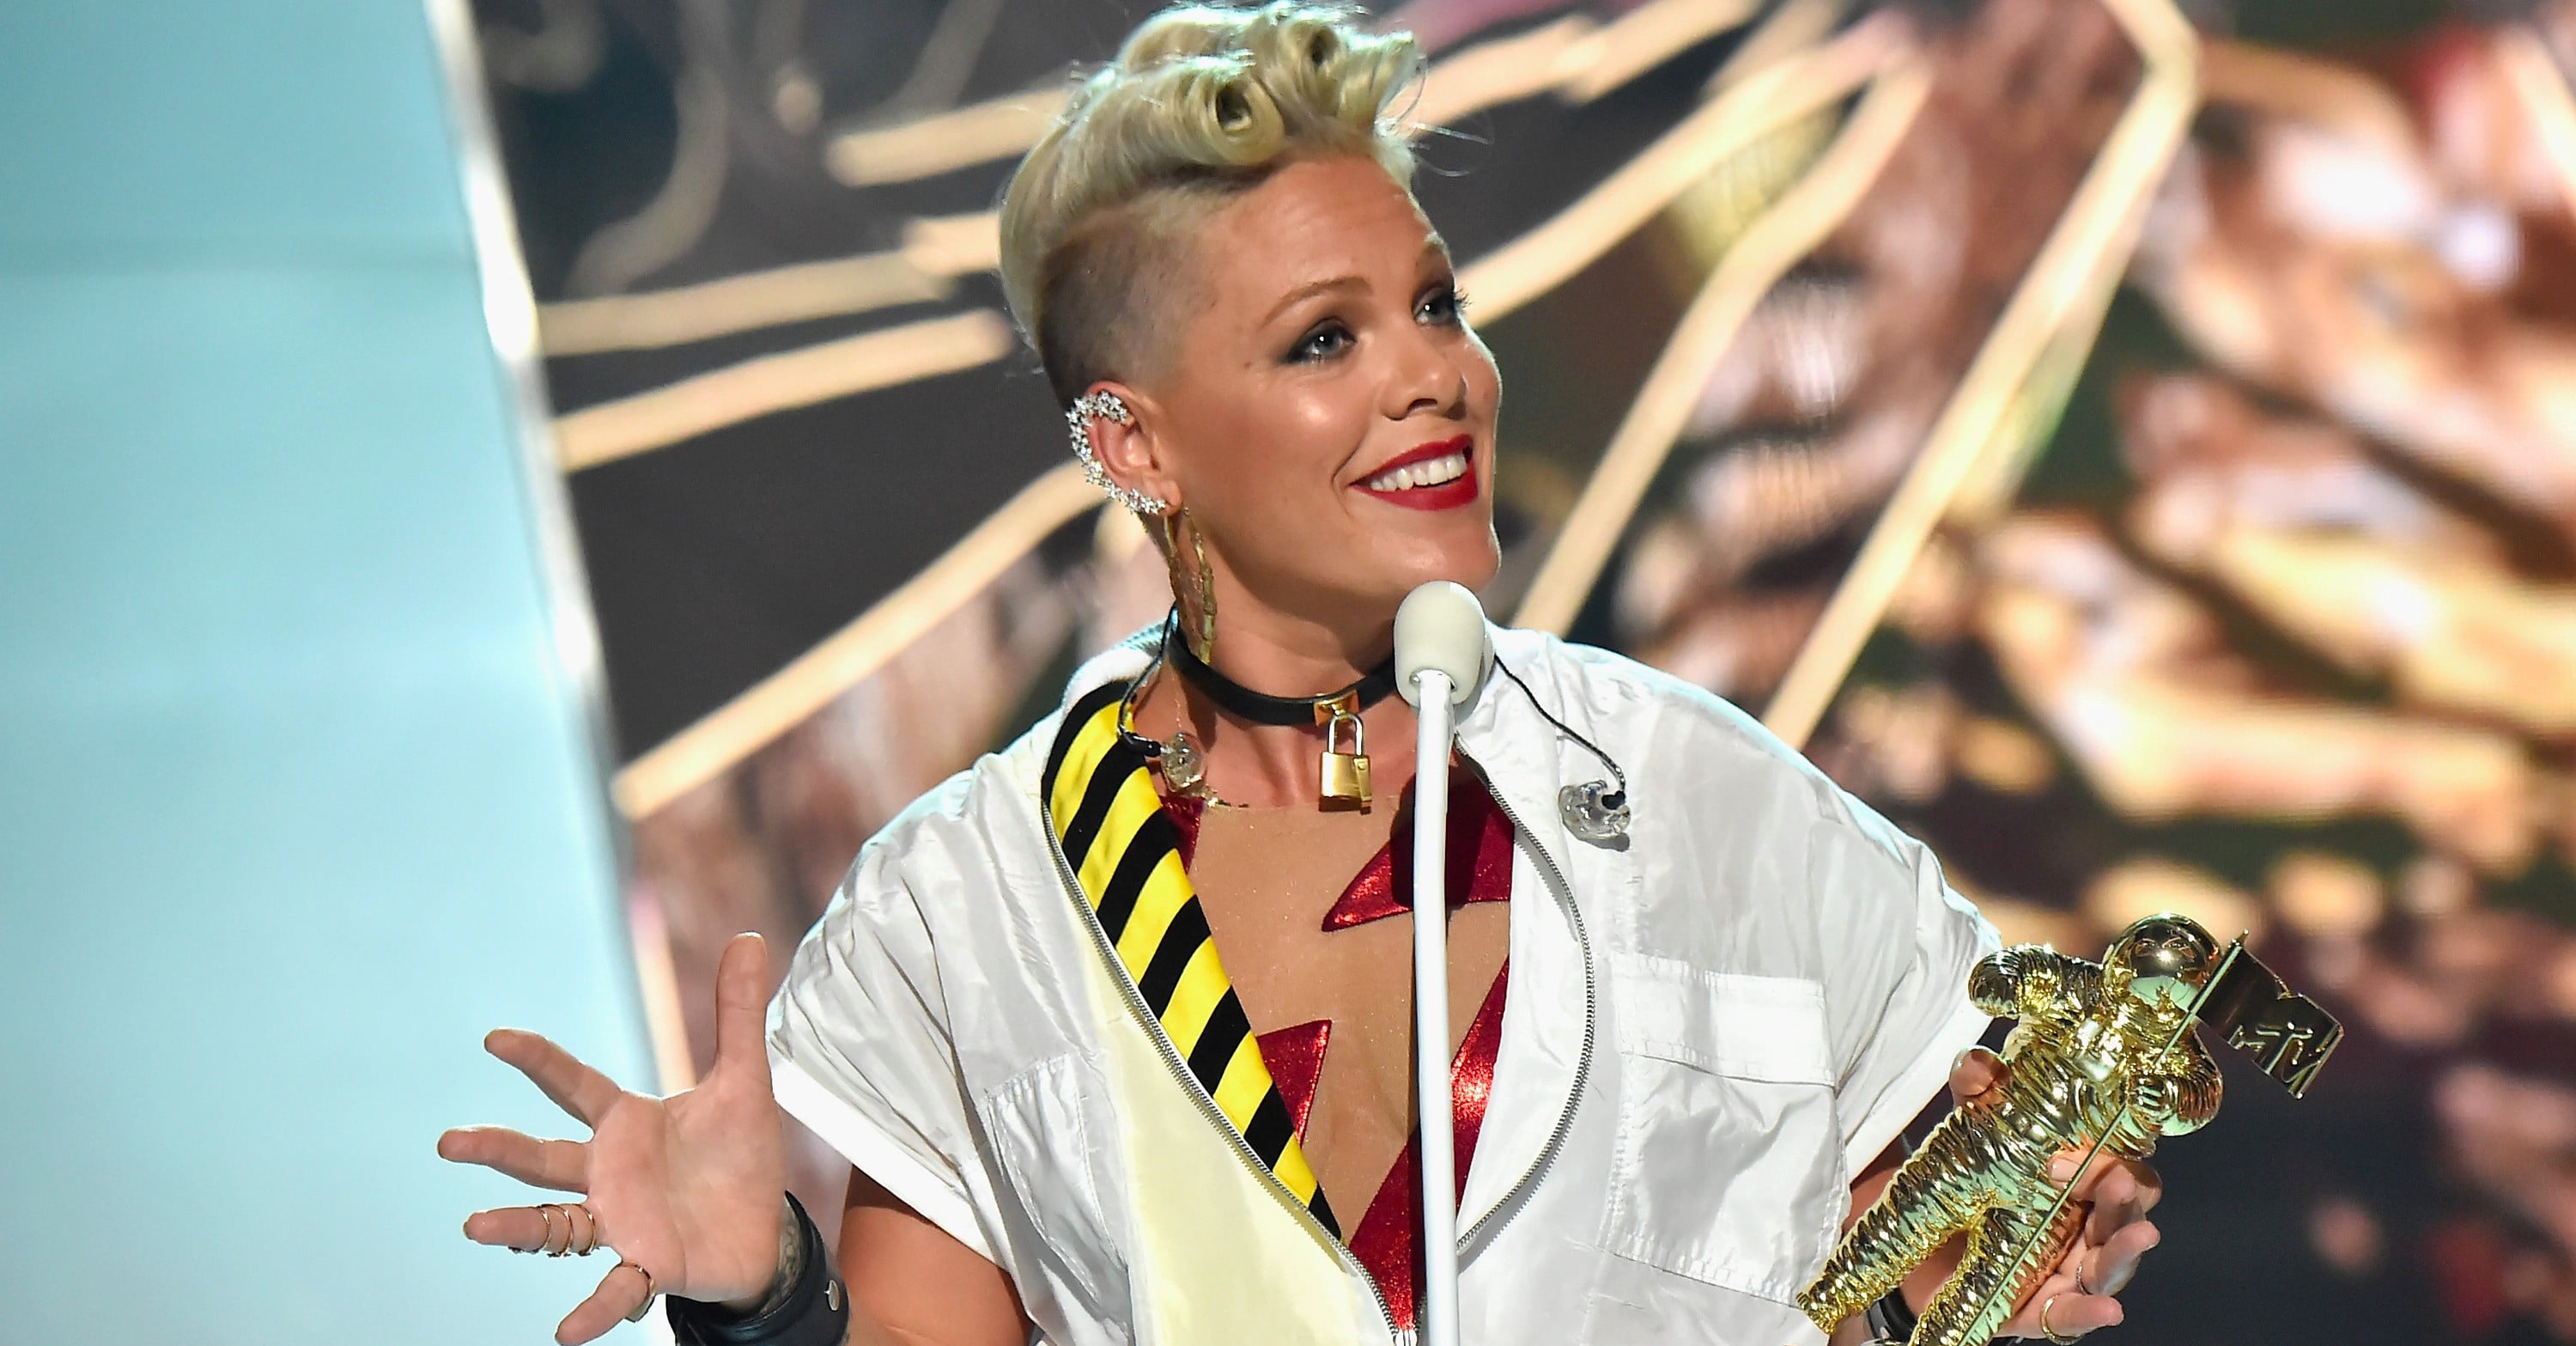 Pink the singer: 12 of her best collaborations so far